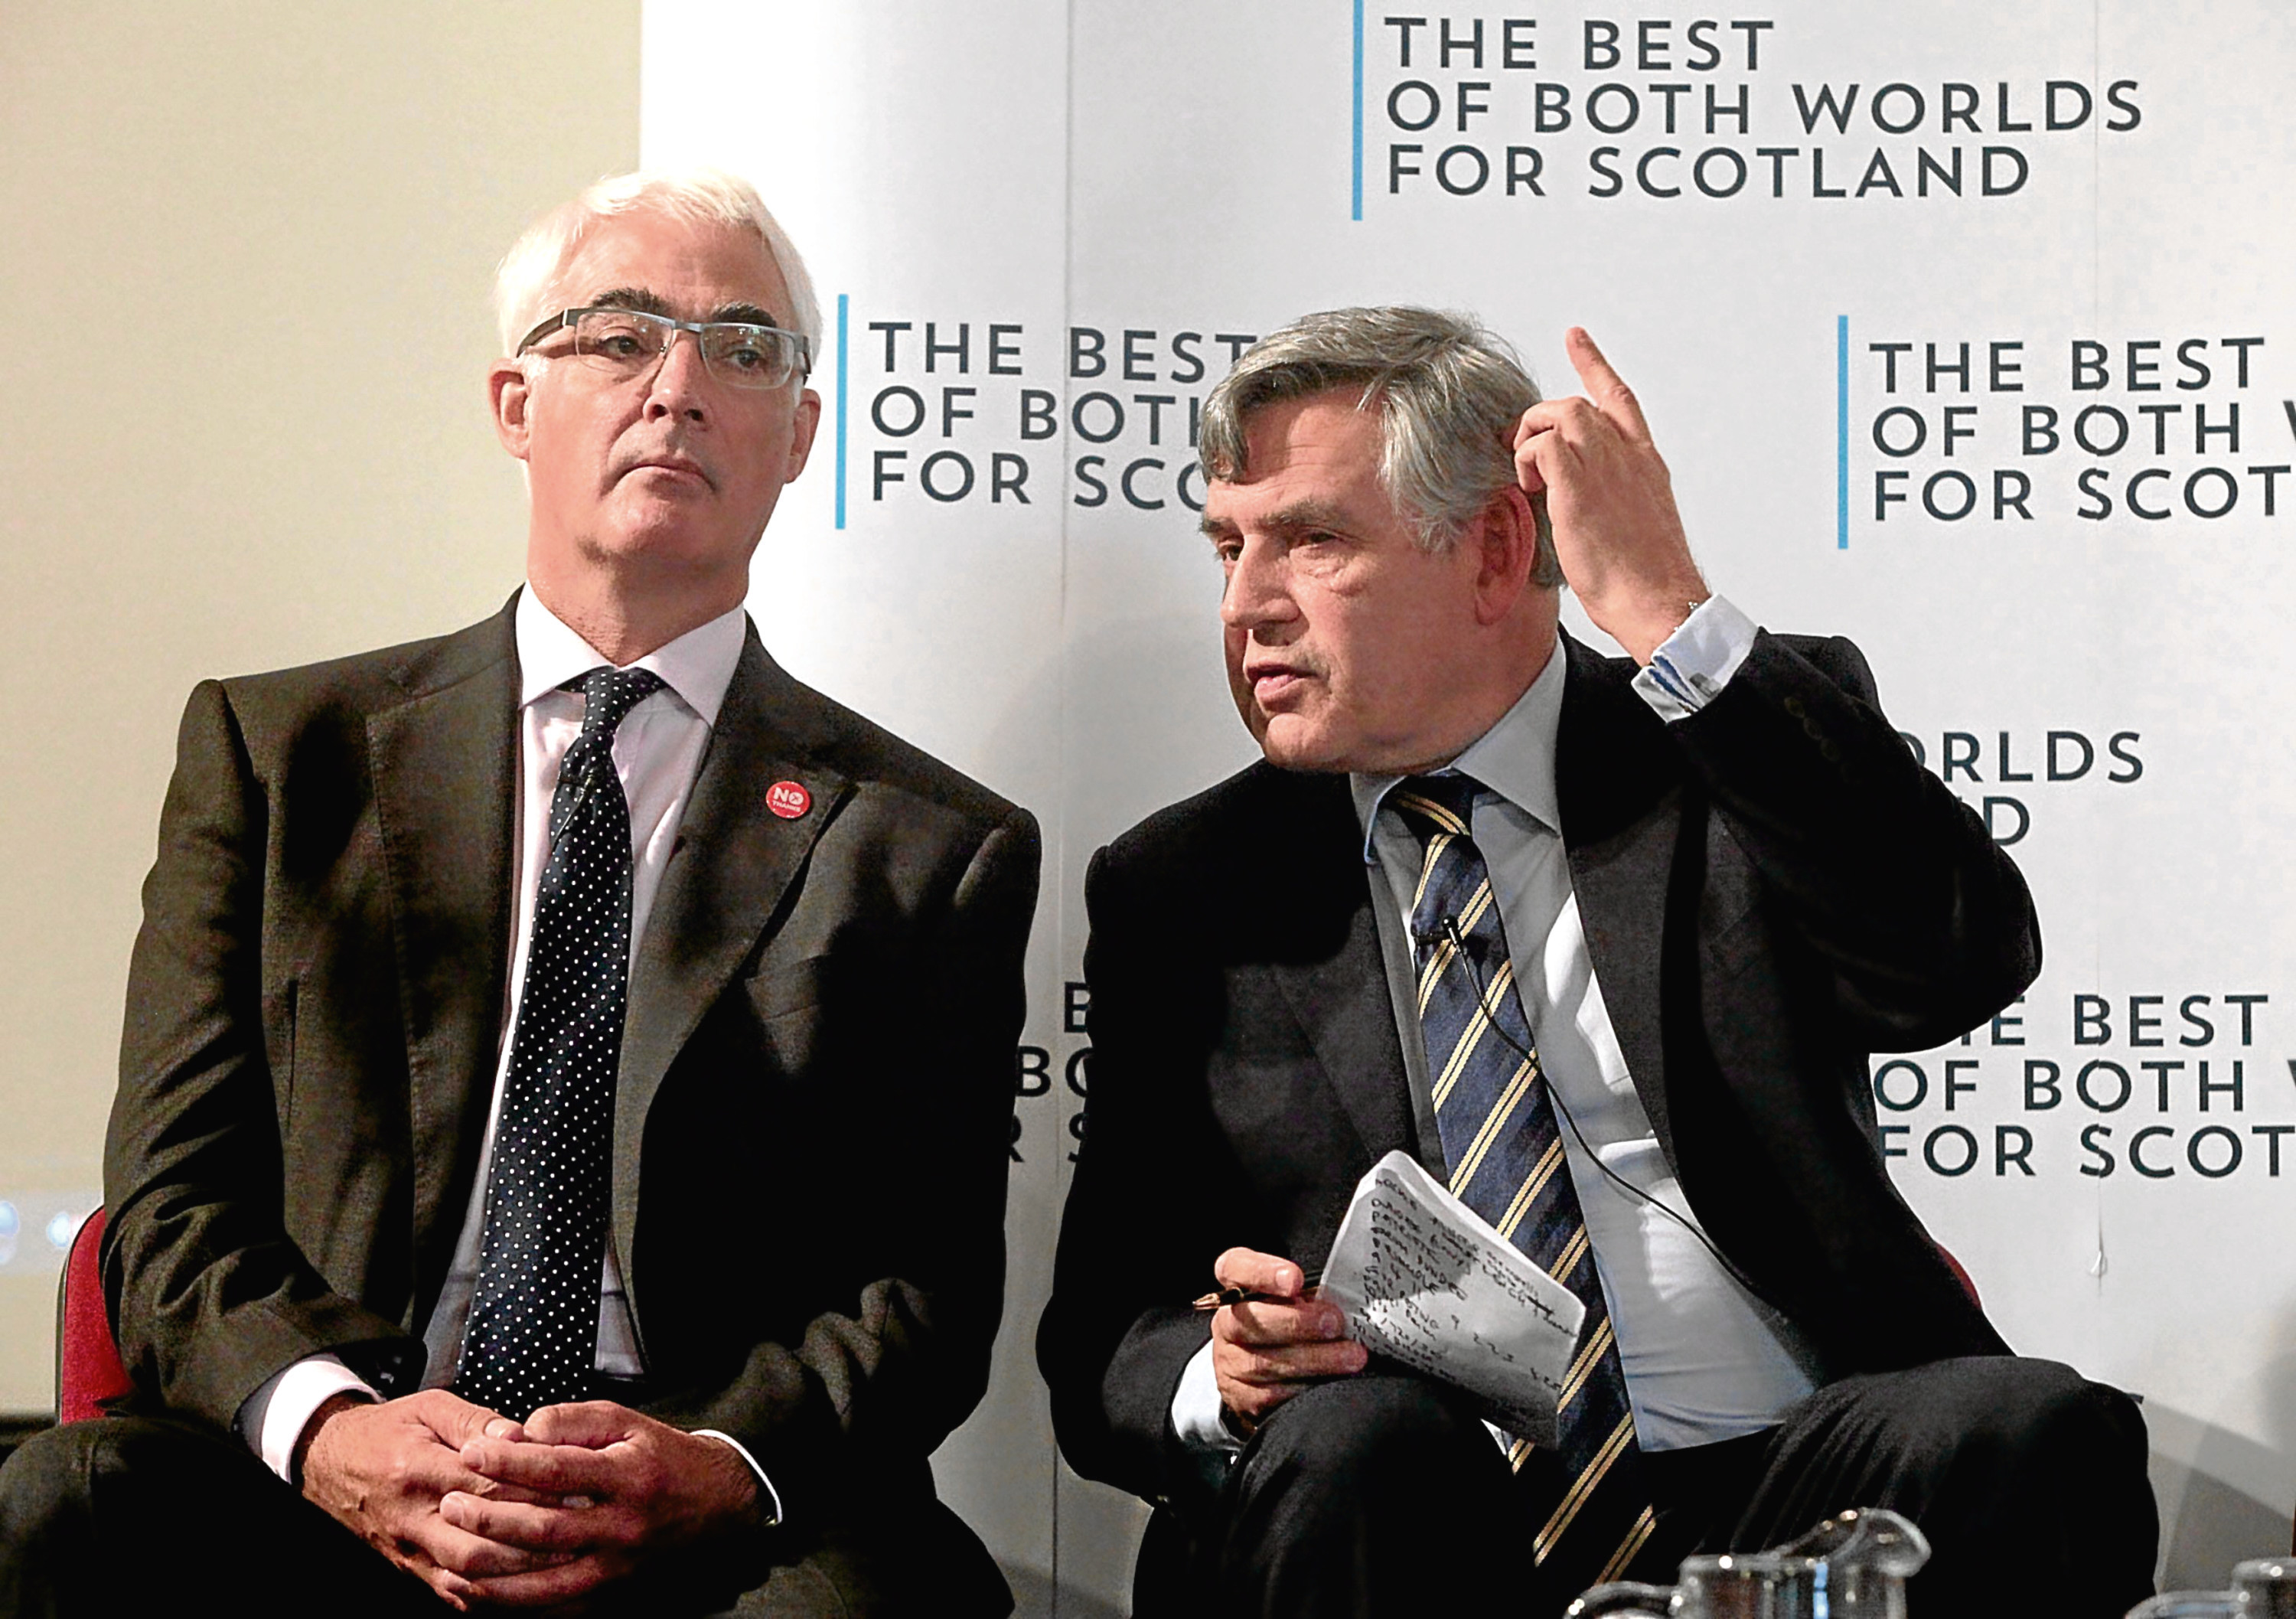 Alistair Darling and former Prime Minister Gordon Brown (Katie-Lee Arrowsmith, HE Media)